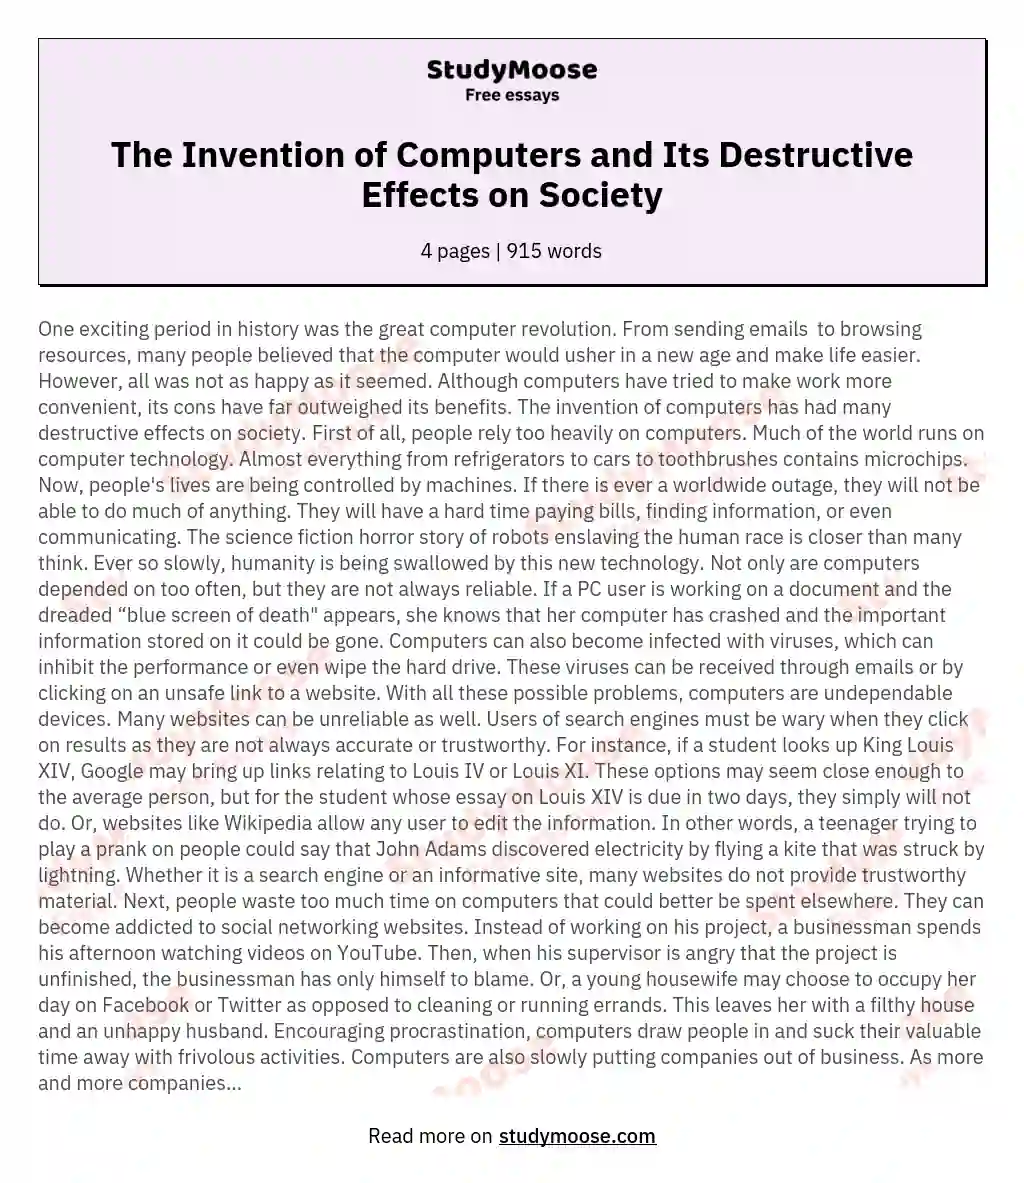 The Invention of Computers and Its Destructive Effects on Society essay